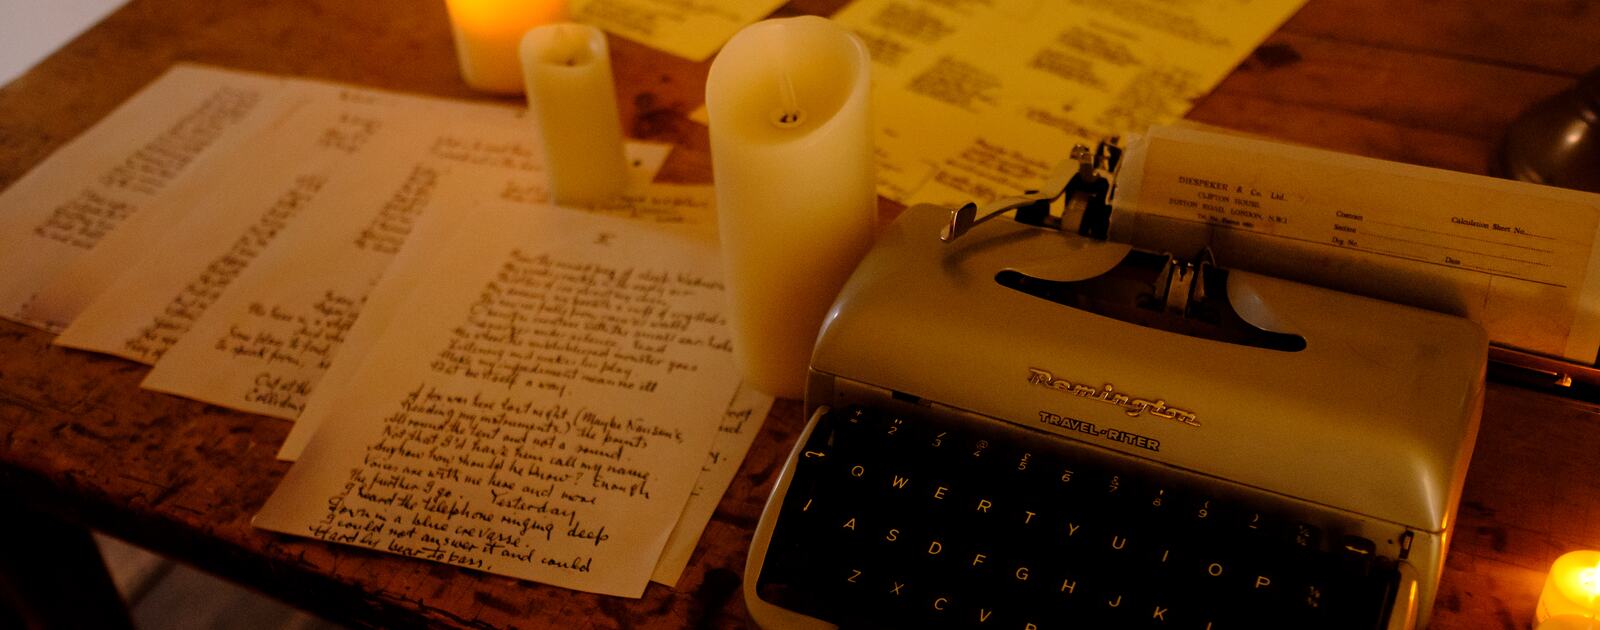 Constructing Spaces, image of typewriter and lit candles on a desk